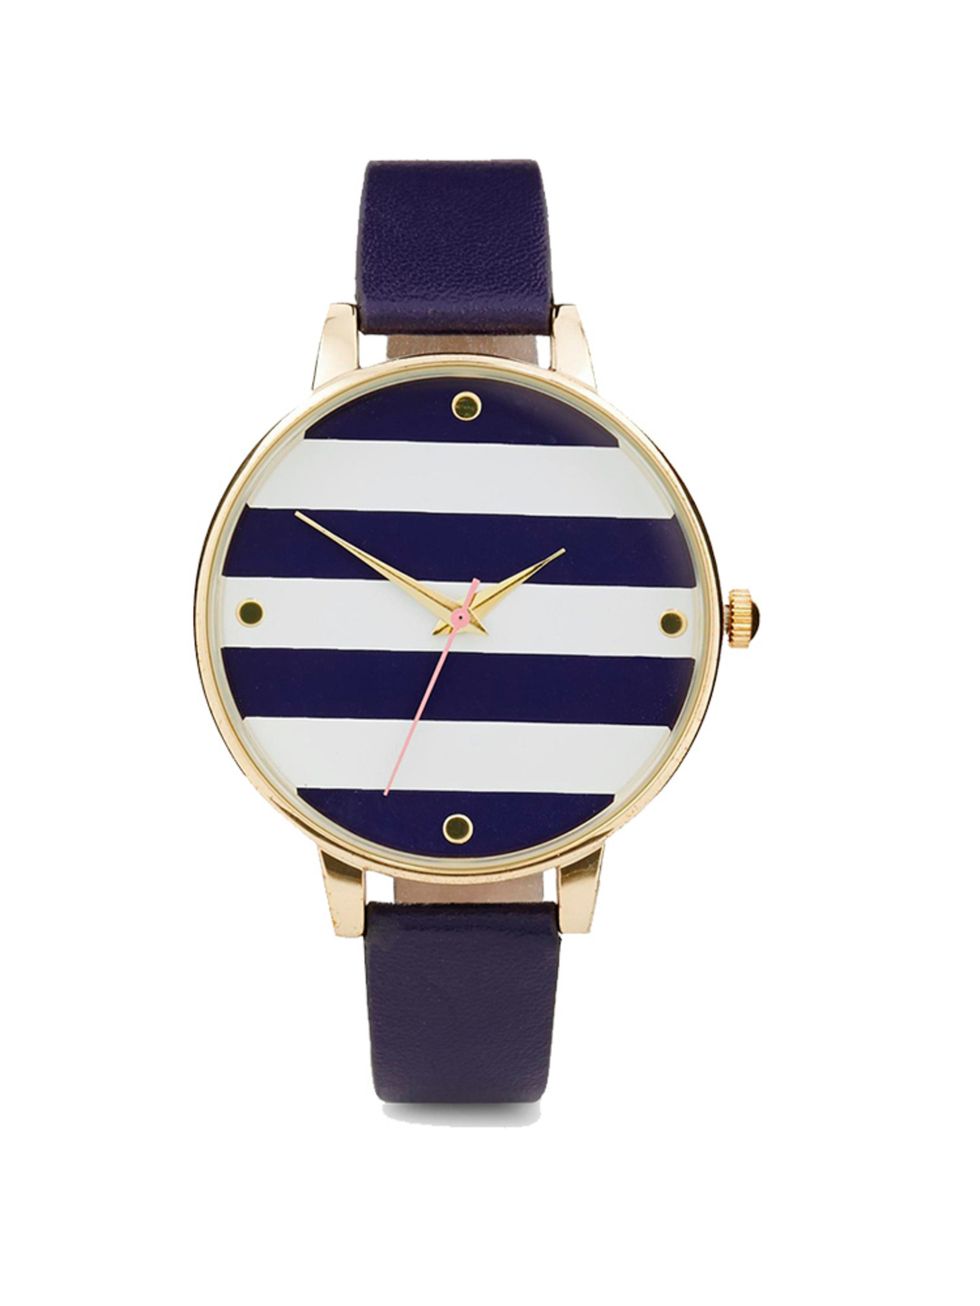 <p>Acting Commissioning Editor Georgia Simmonds is addicted to the nautical trend this season. </p>

<p><a href="http://www.asos.com/ASOS/ASOS-Stripe-Large-Round-Face-Watch/Prod/pgeproduct.aspx?iid=4382356&cid=13489&sh=0&pge=1&pgesize=36&sort=-1&clr=Navy&